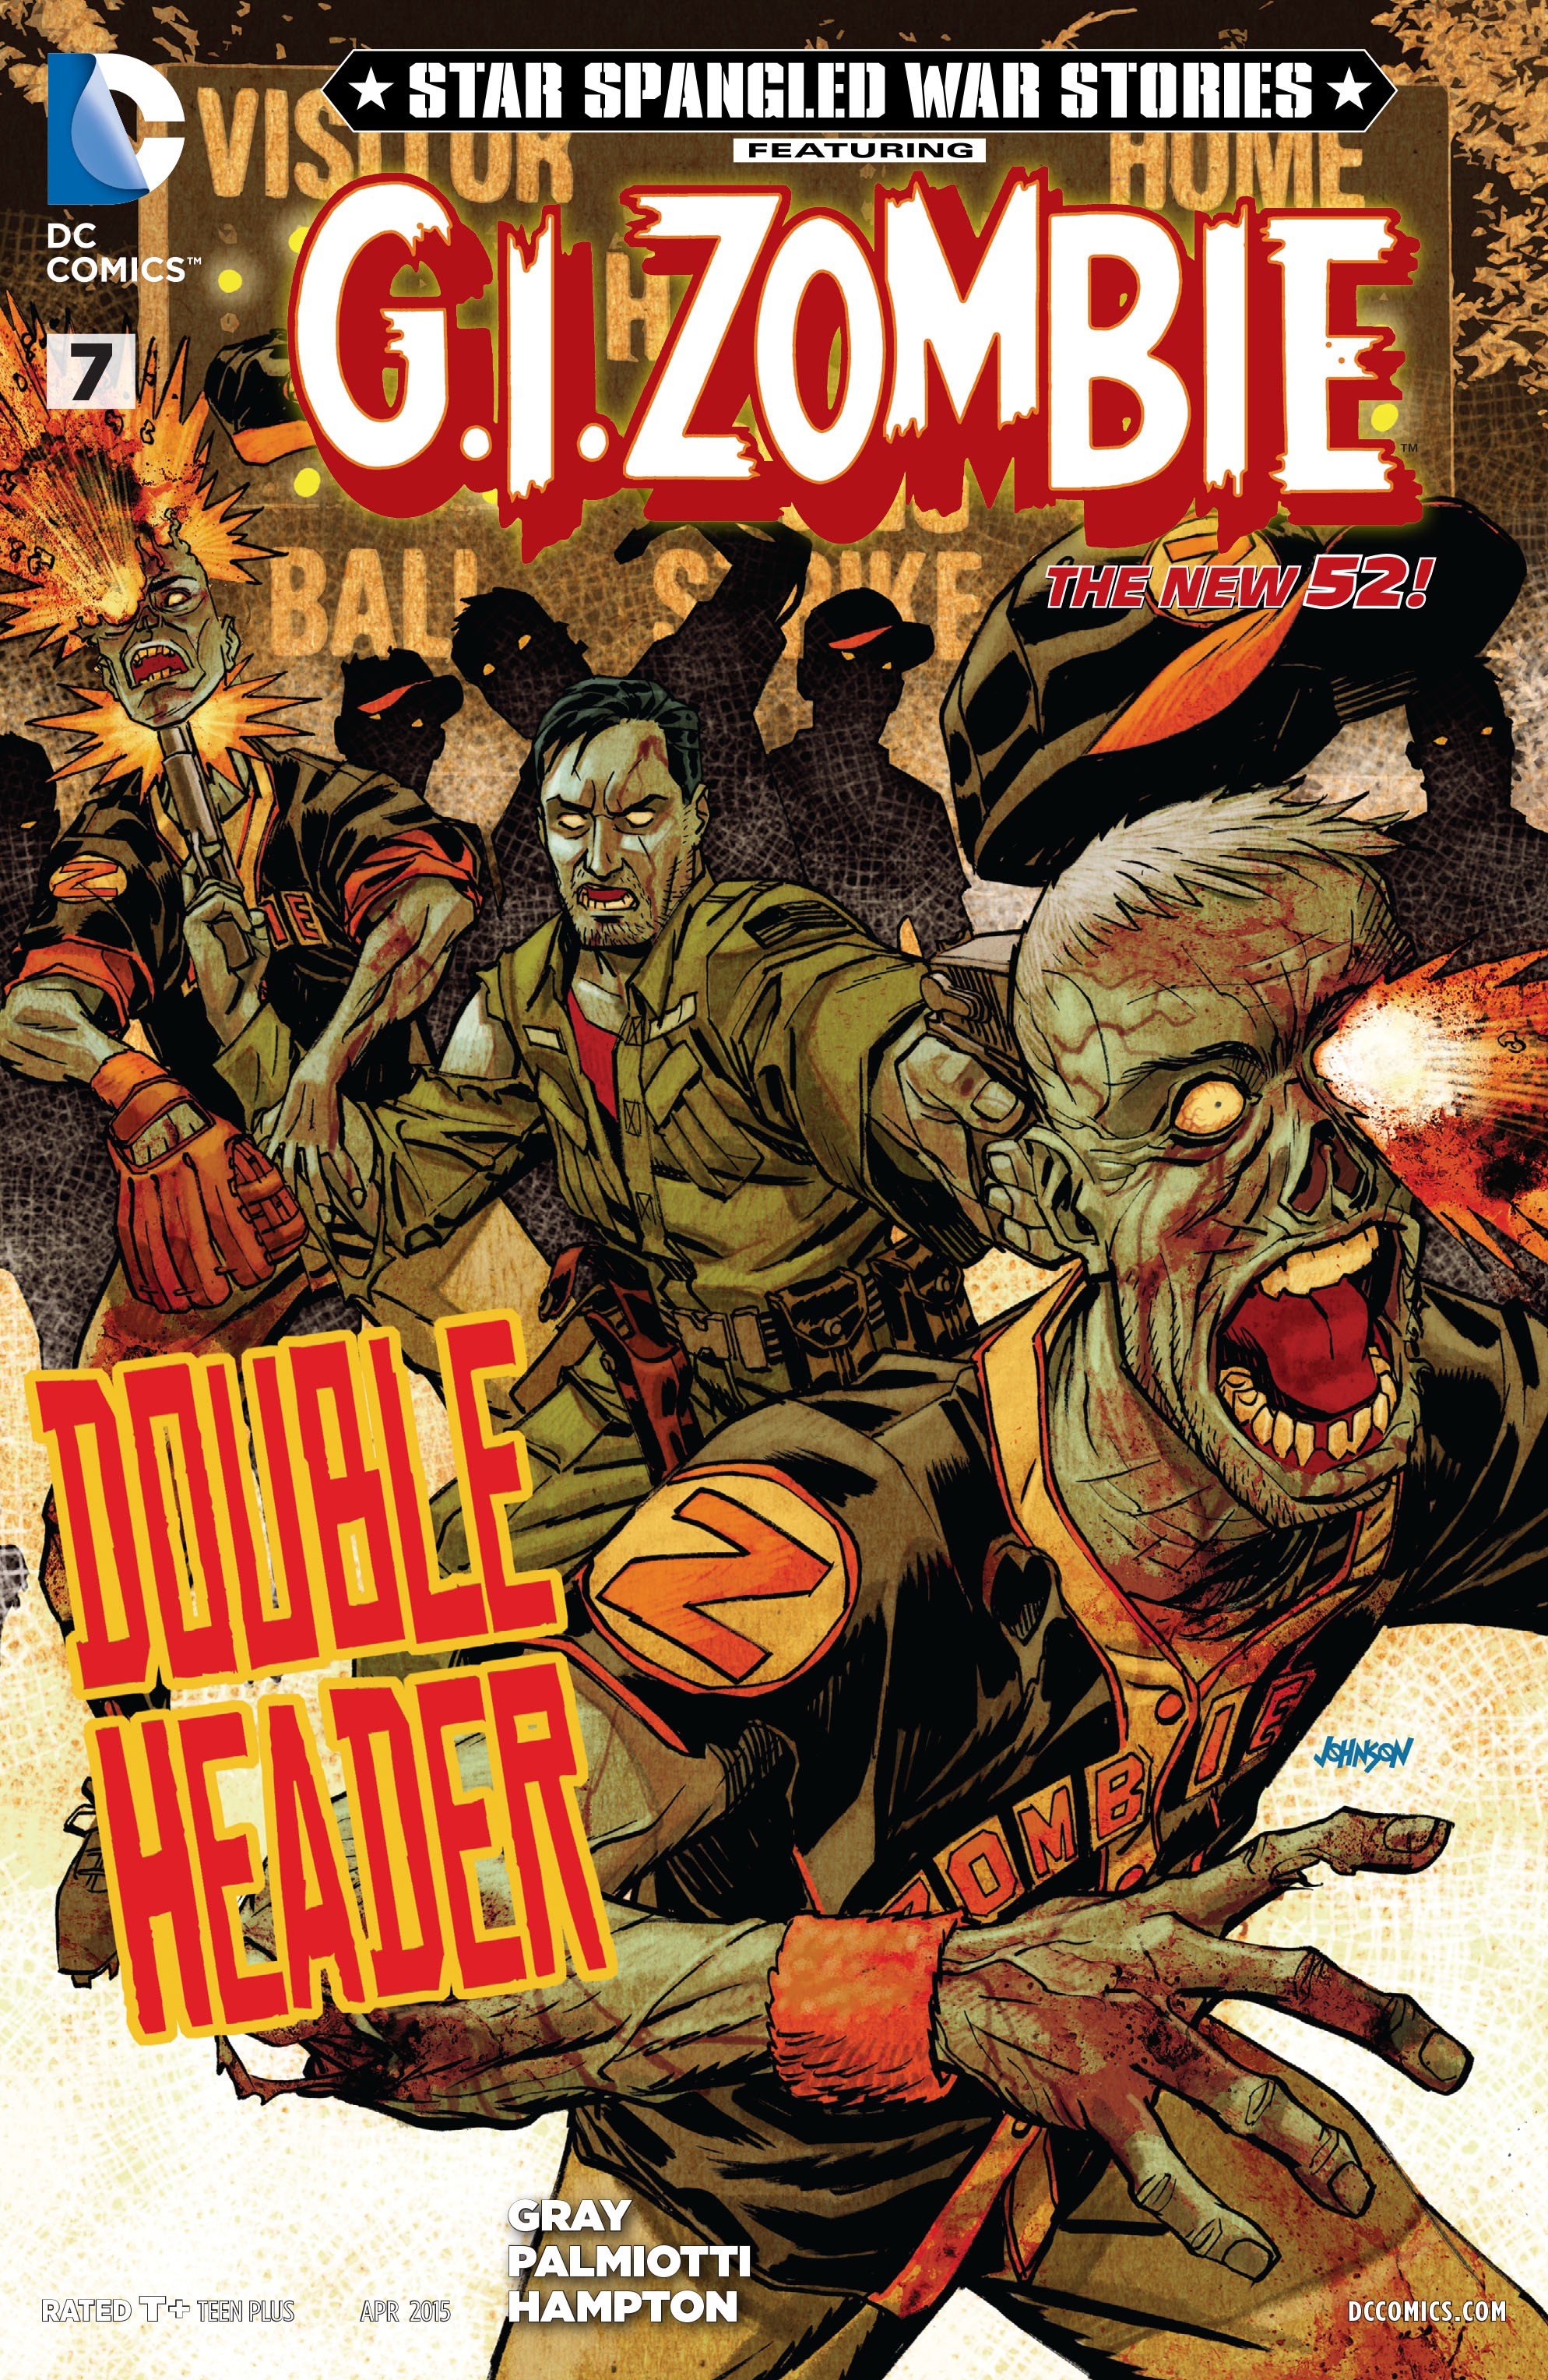 Star-Spangled War Stories Featuring G.I. Zombie Vol. 1 #7